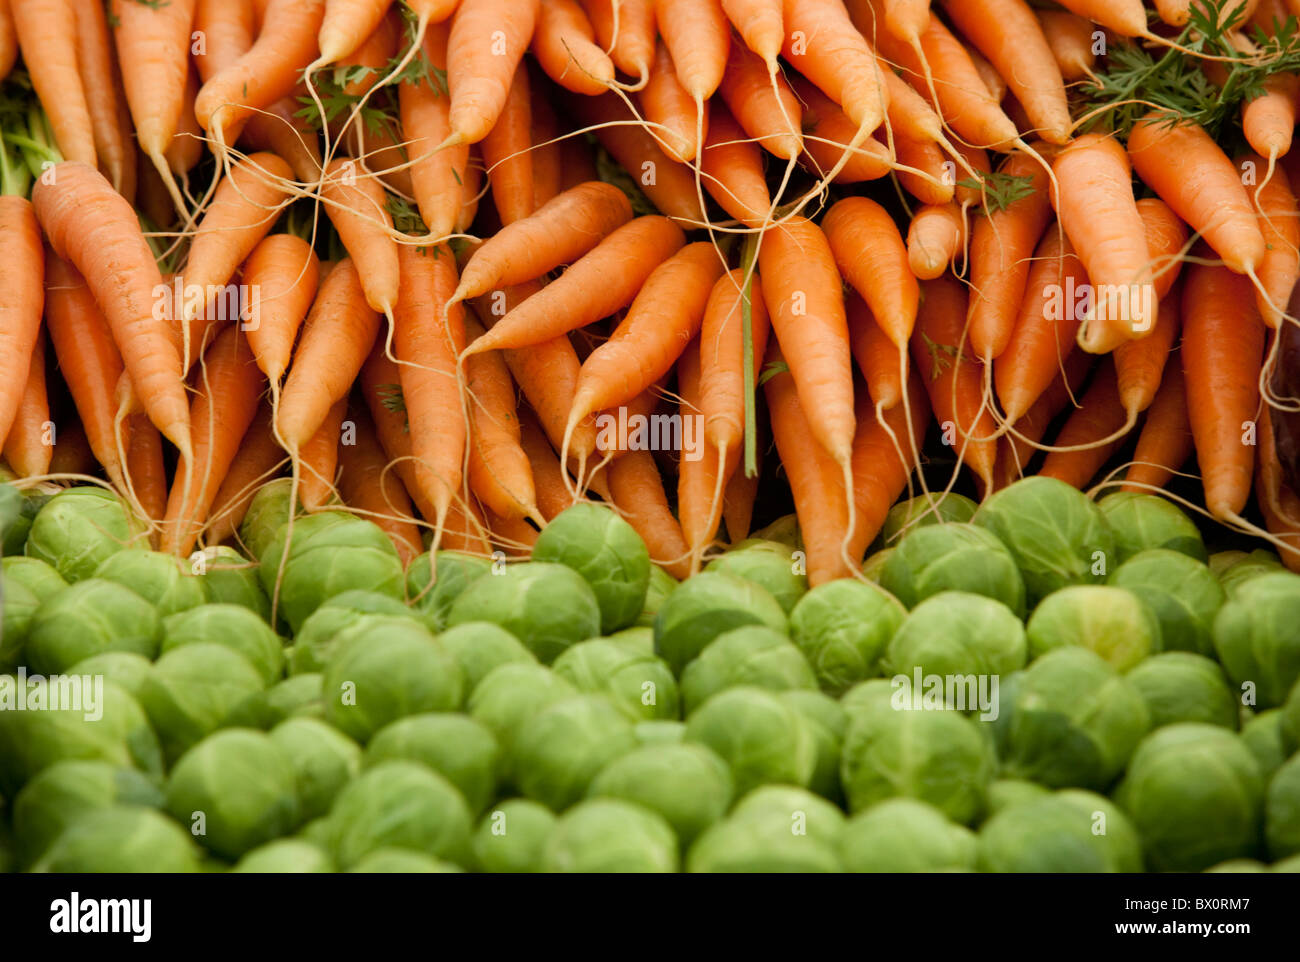 Carrots and Brussel Sprouts. Stock Photo